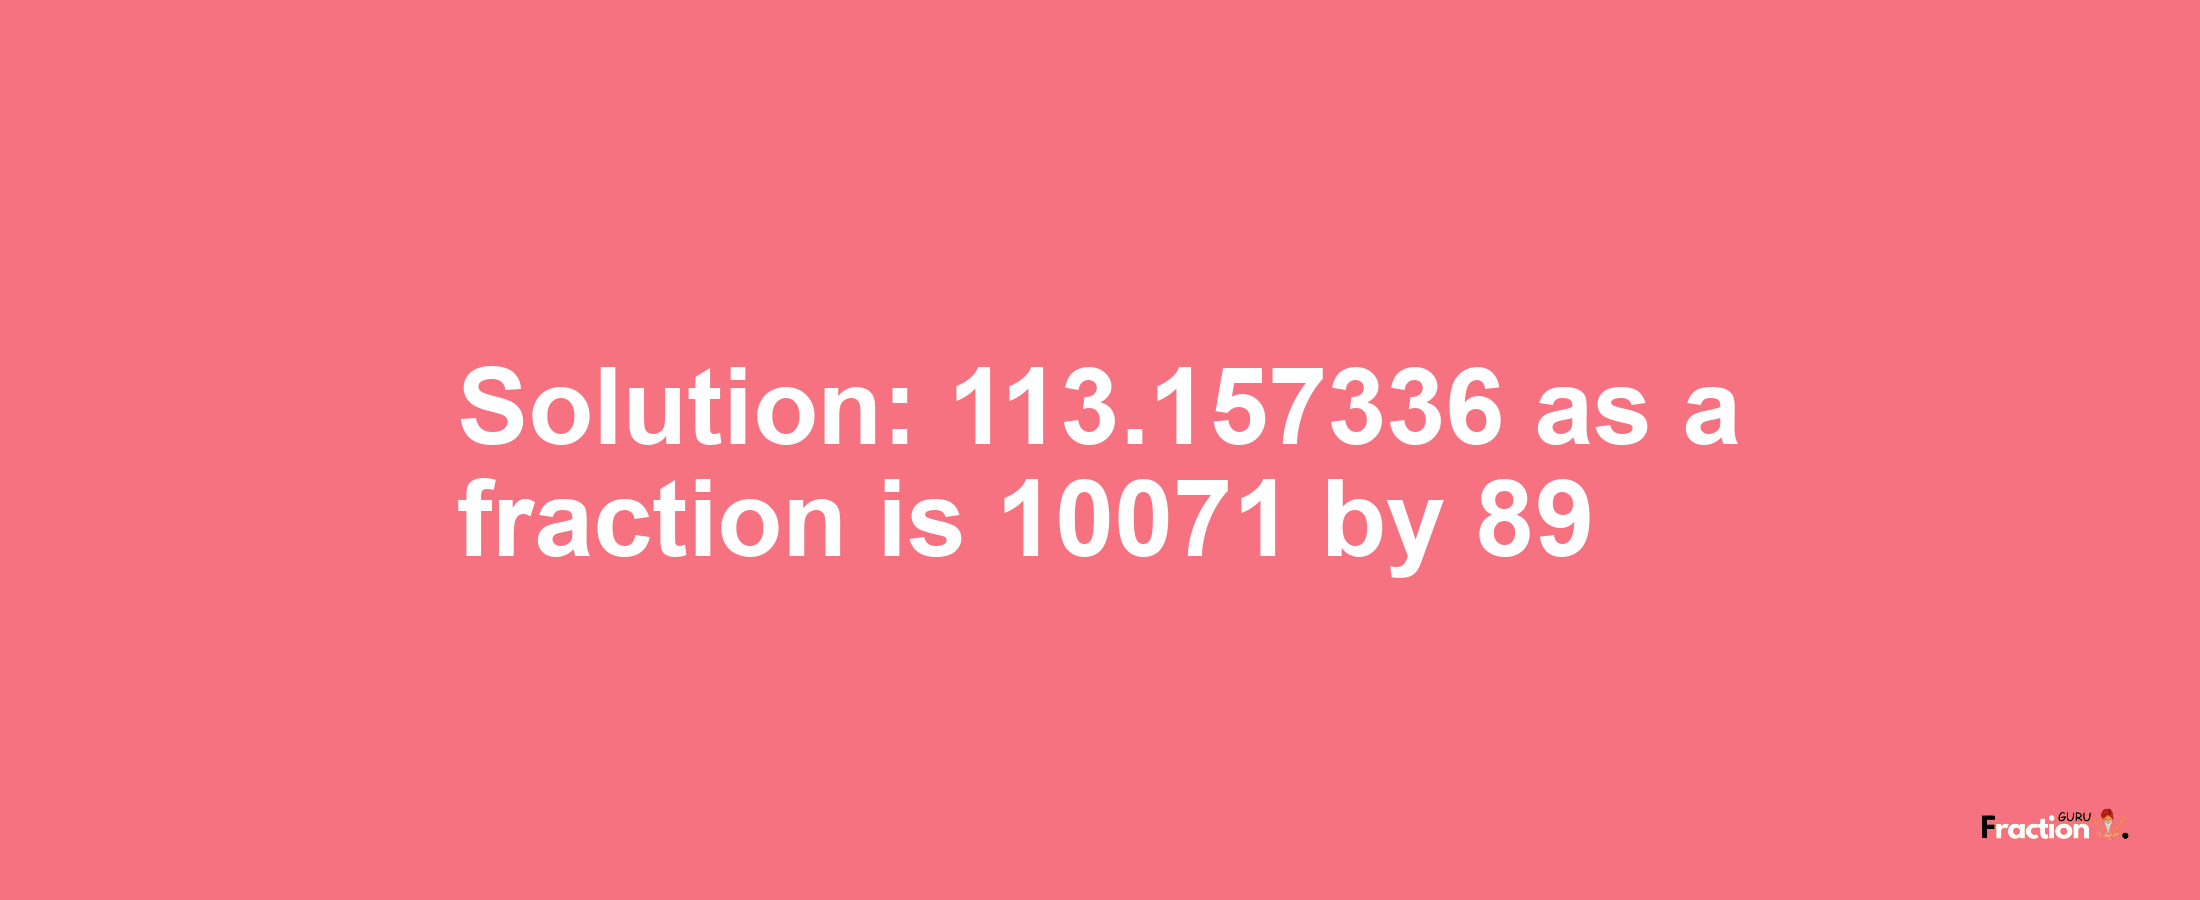 Solution:113.157336 as a fraction is 10071/89